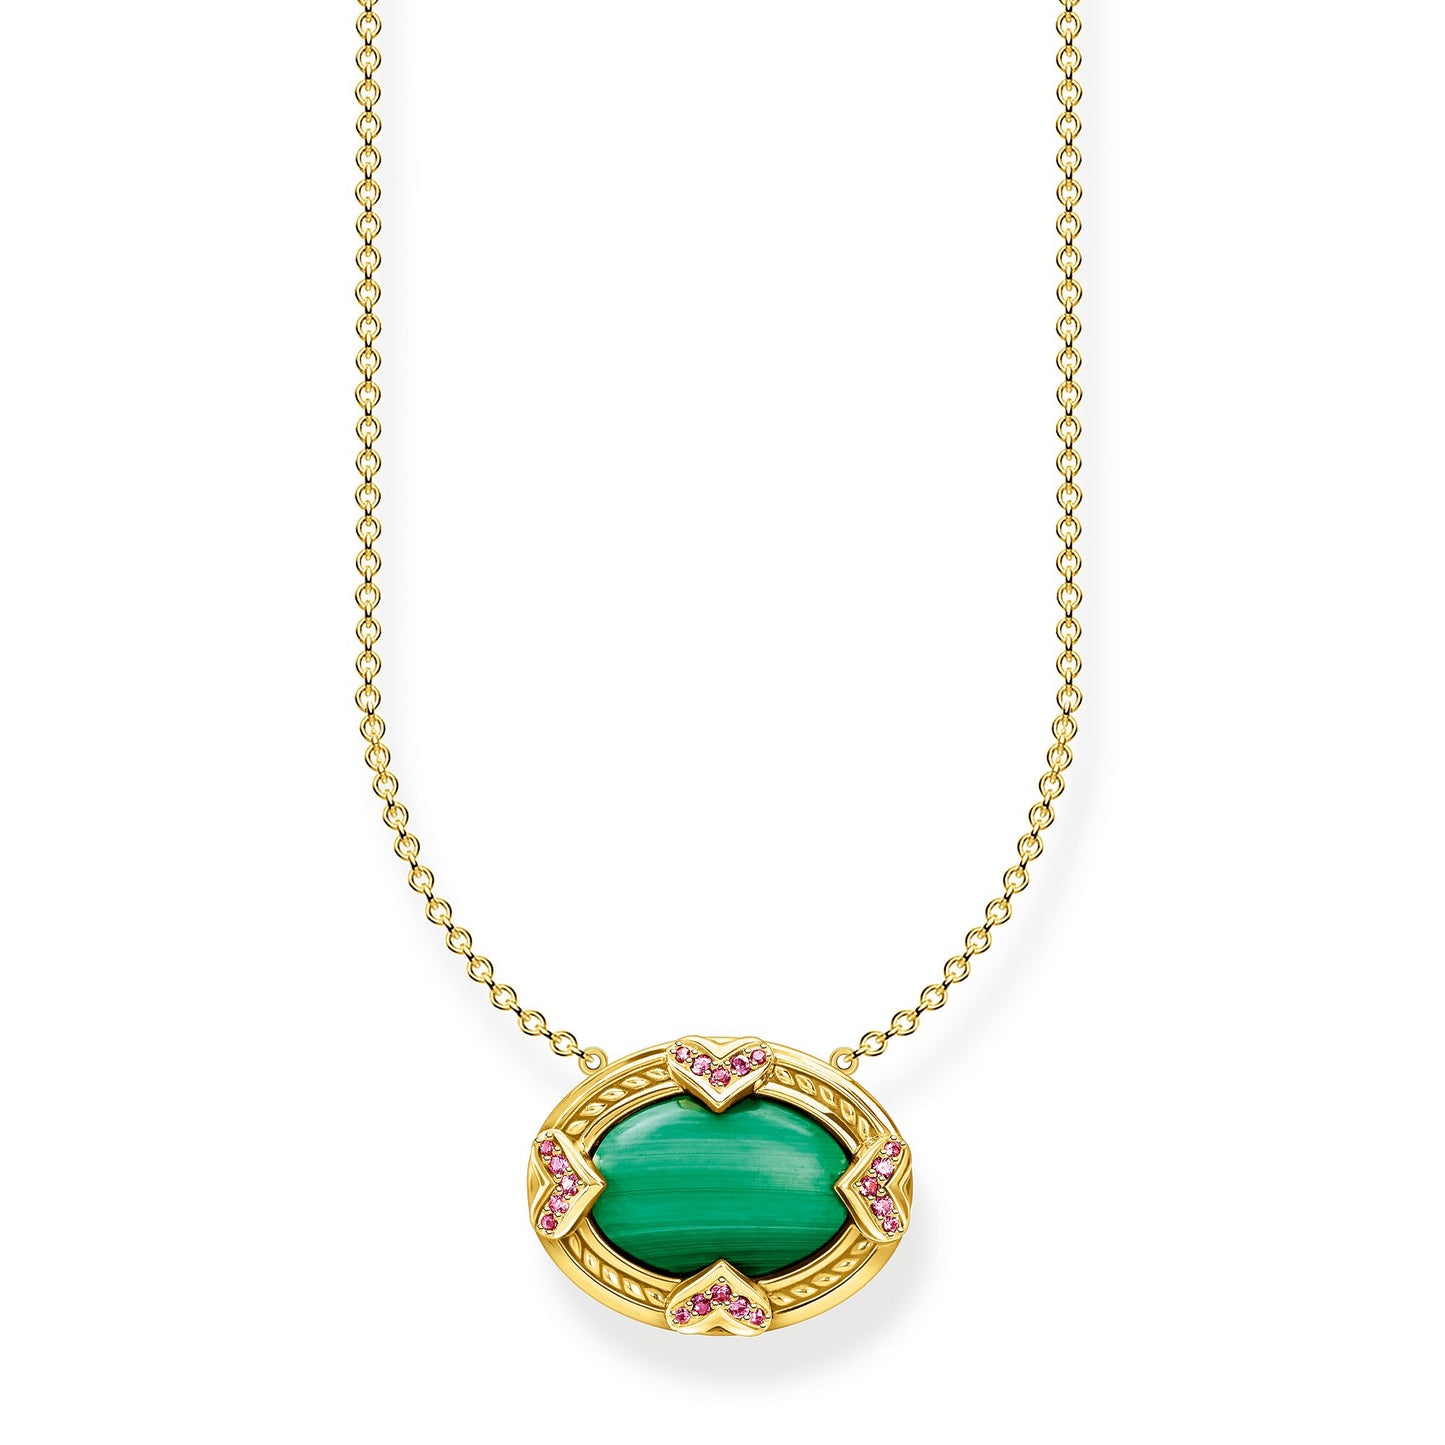 STERLING SILVER YELLOW GOLD PLATED MAGIC GARDEN MALACHITE NECKLACE